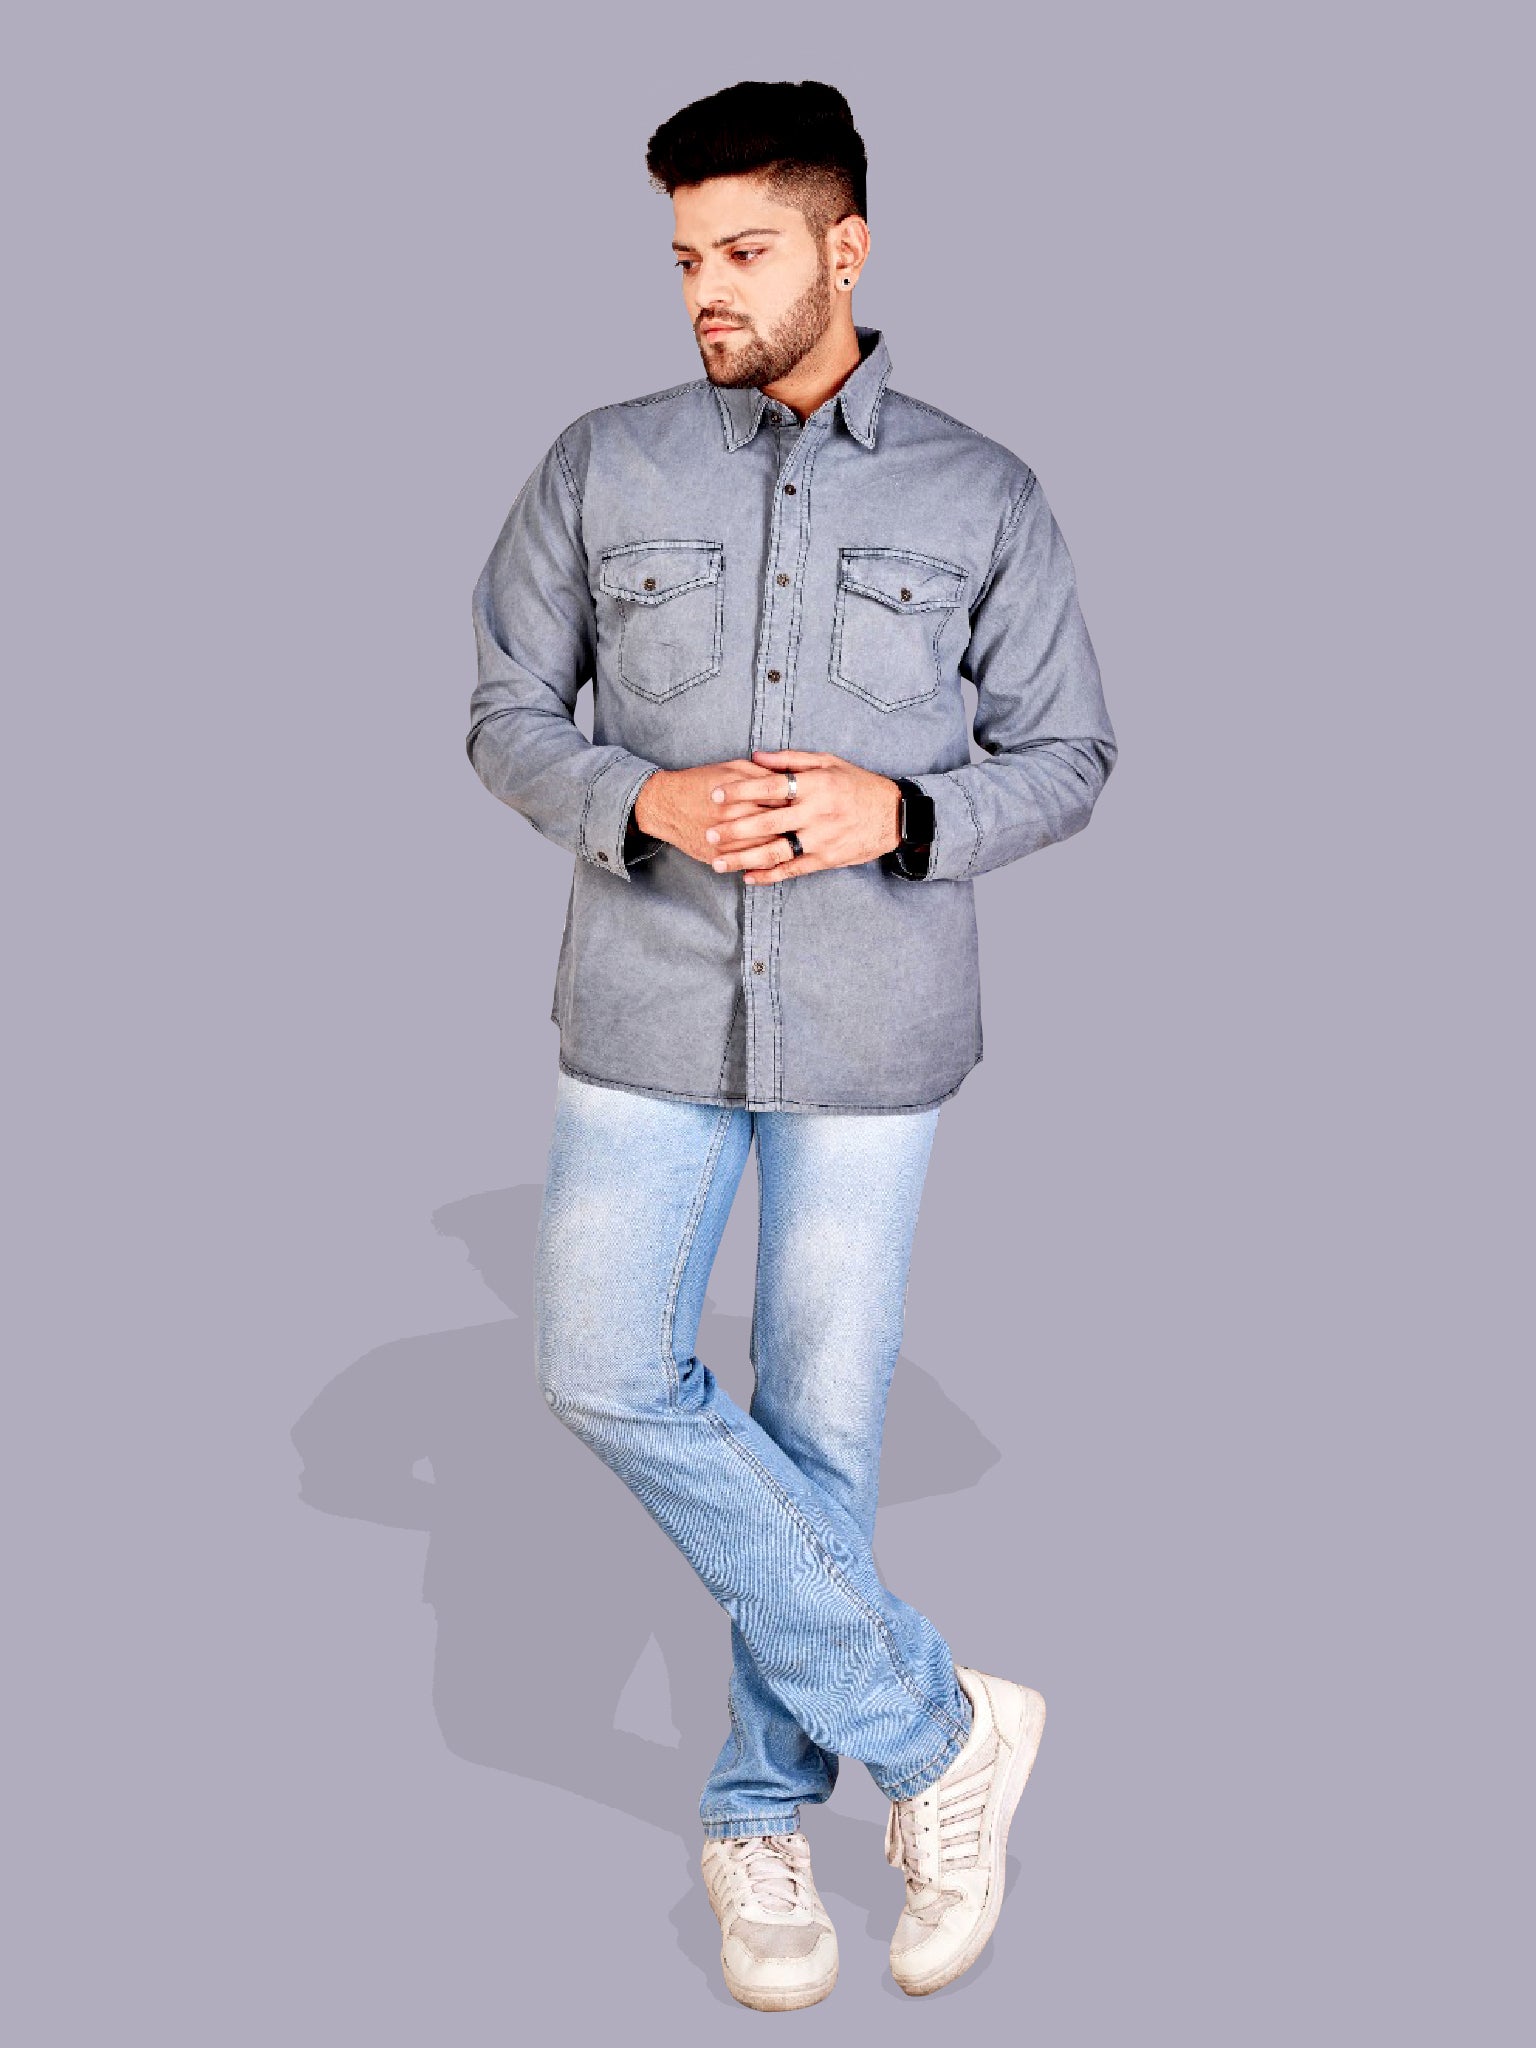 Steel Gray Denim Shirts To Unveiling Refined Style-2